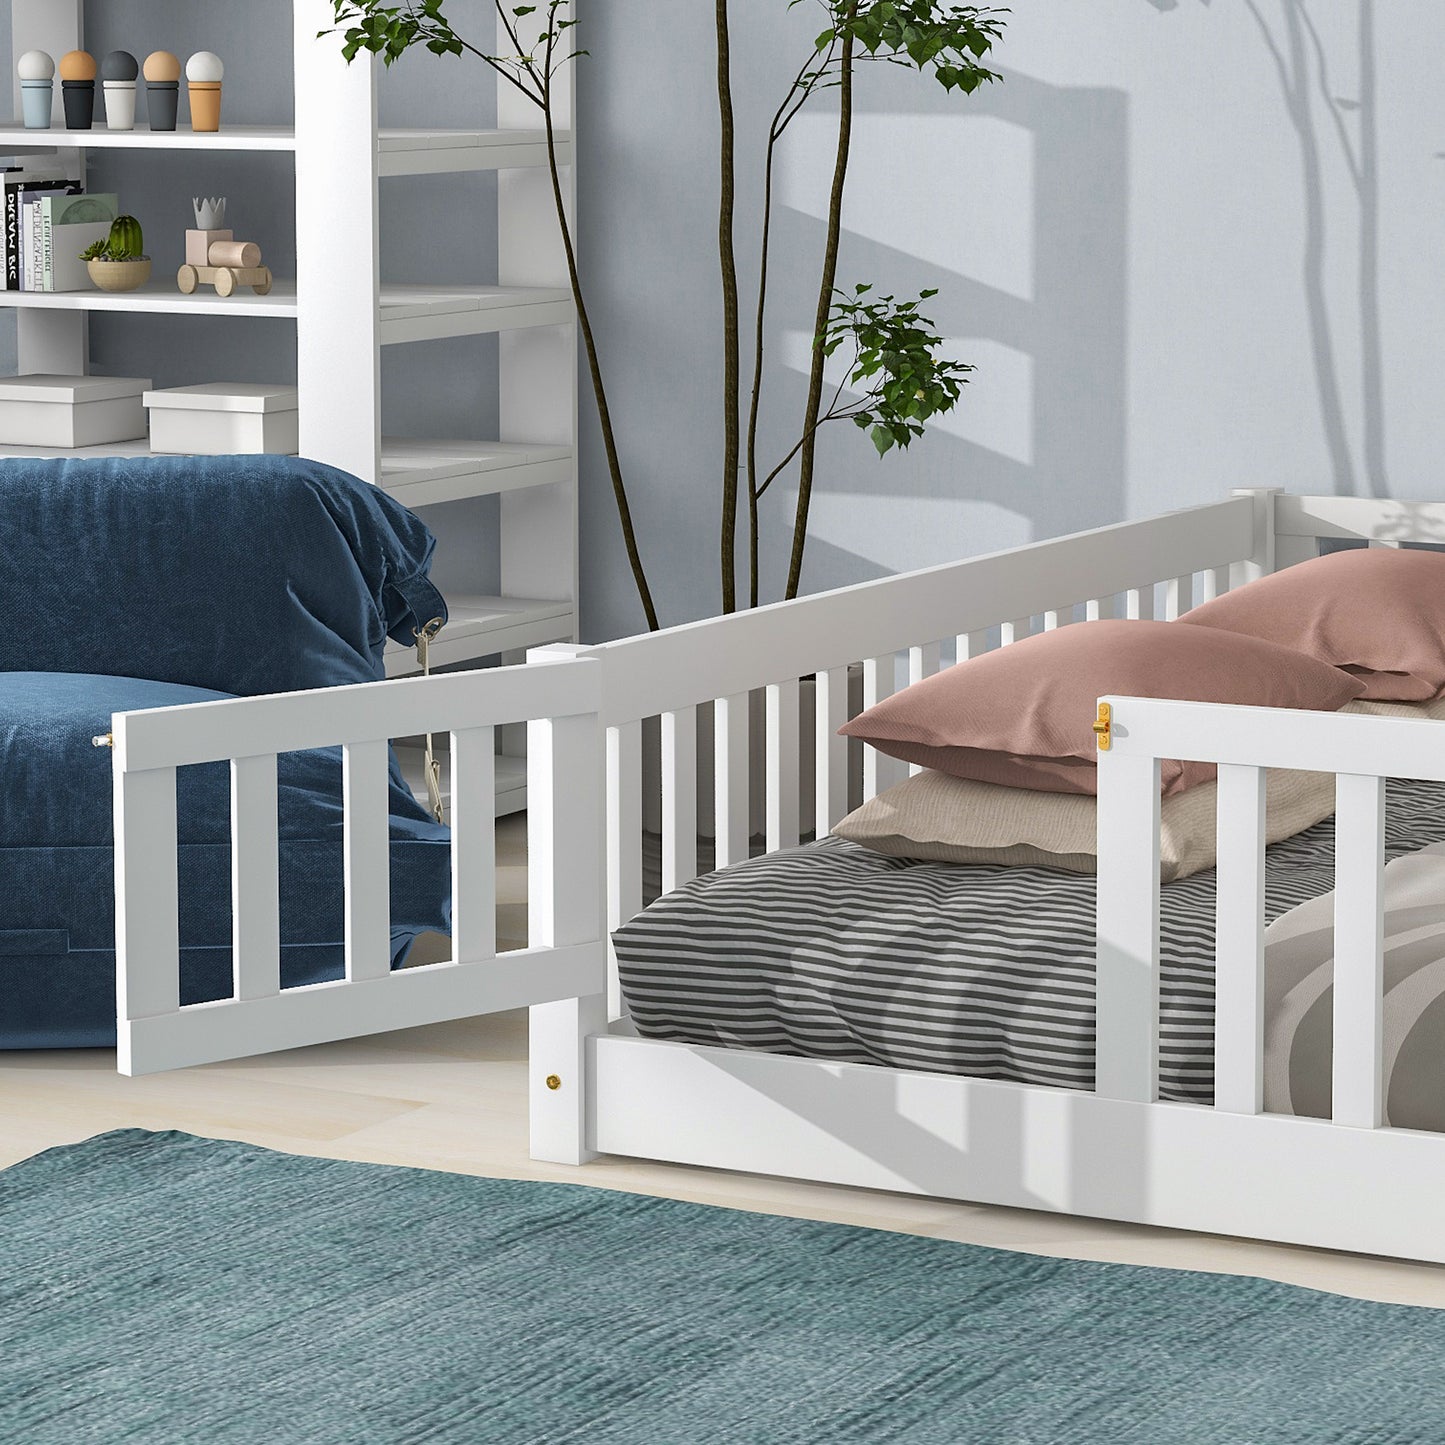 Twin Size Floor Bed for Kids, HSUNNS Twin Size Wood Toddler Floor Bed with Fence and Door, Twin Bed Montessori Floor Bed No Box Spring needed, Toddler Bed for Boys Girls, Slats Support, Gray